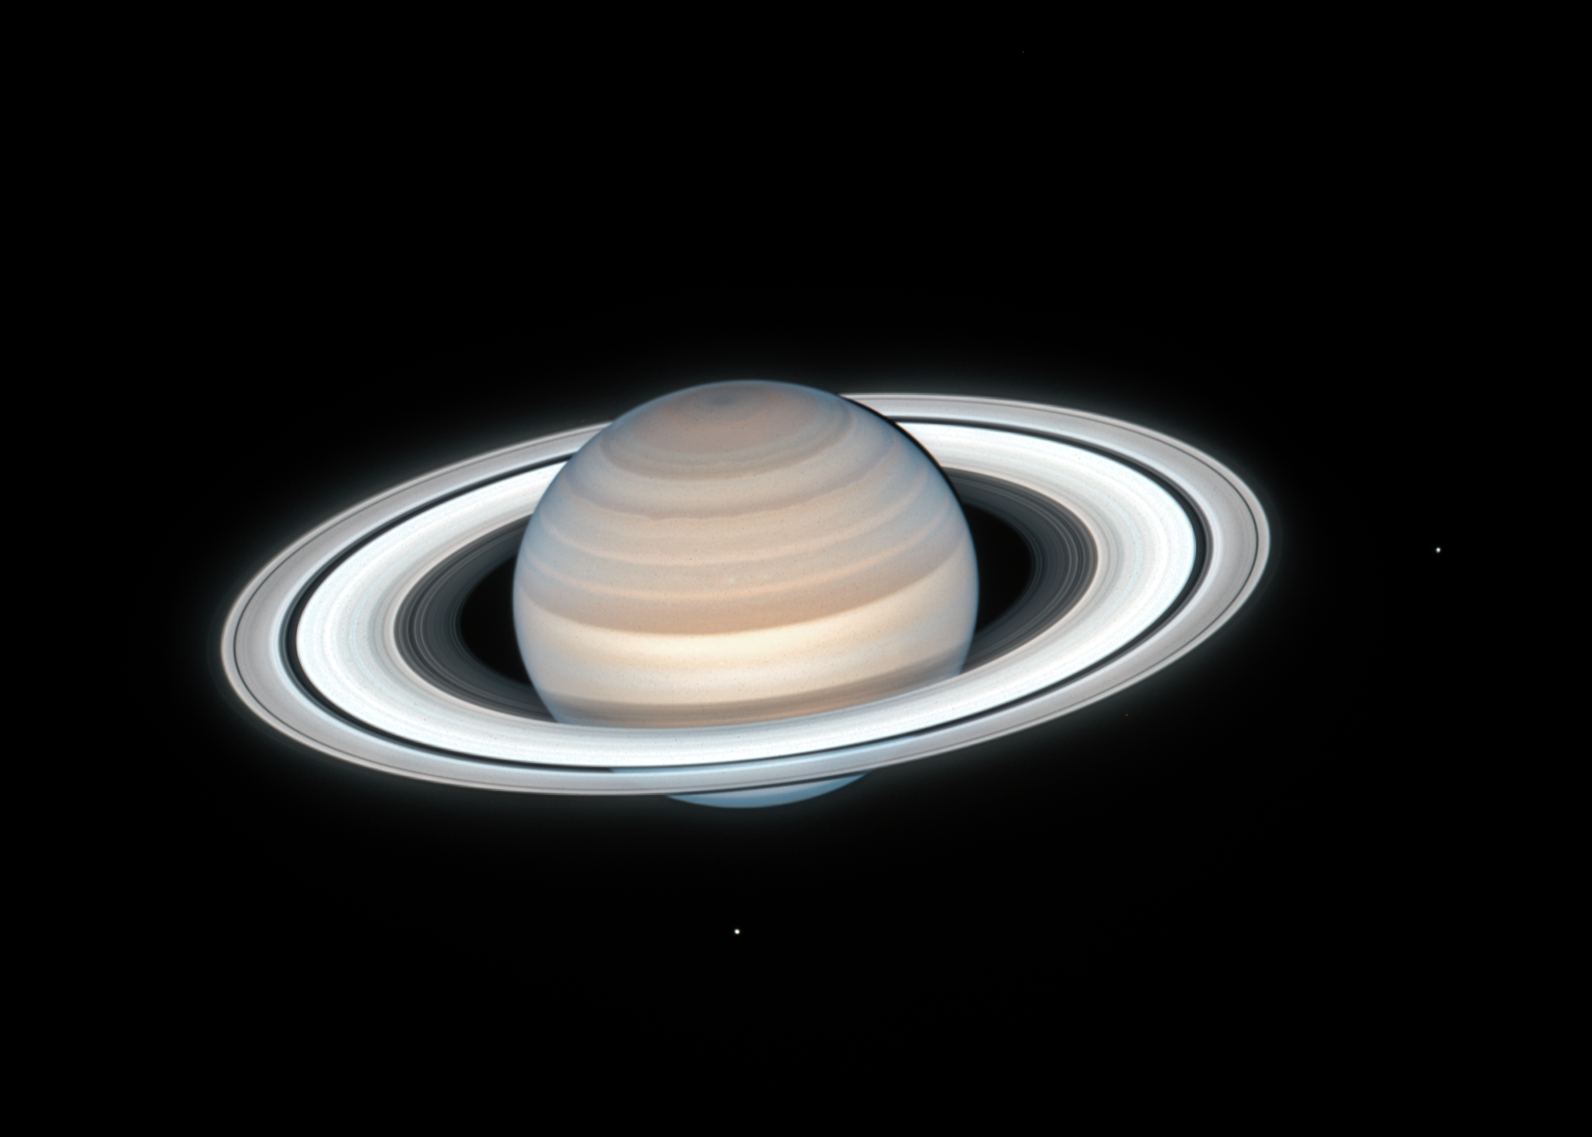 Saturn's moons and rings